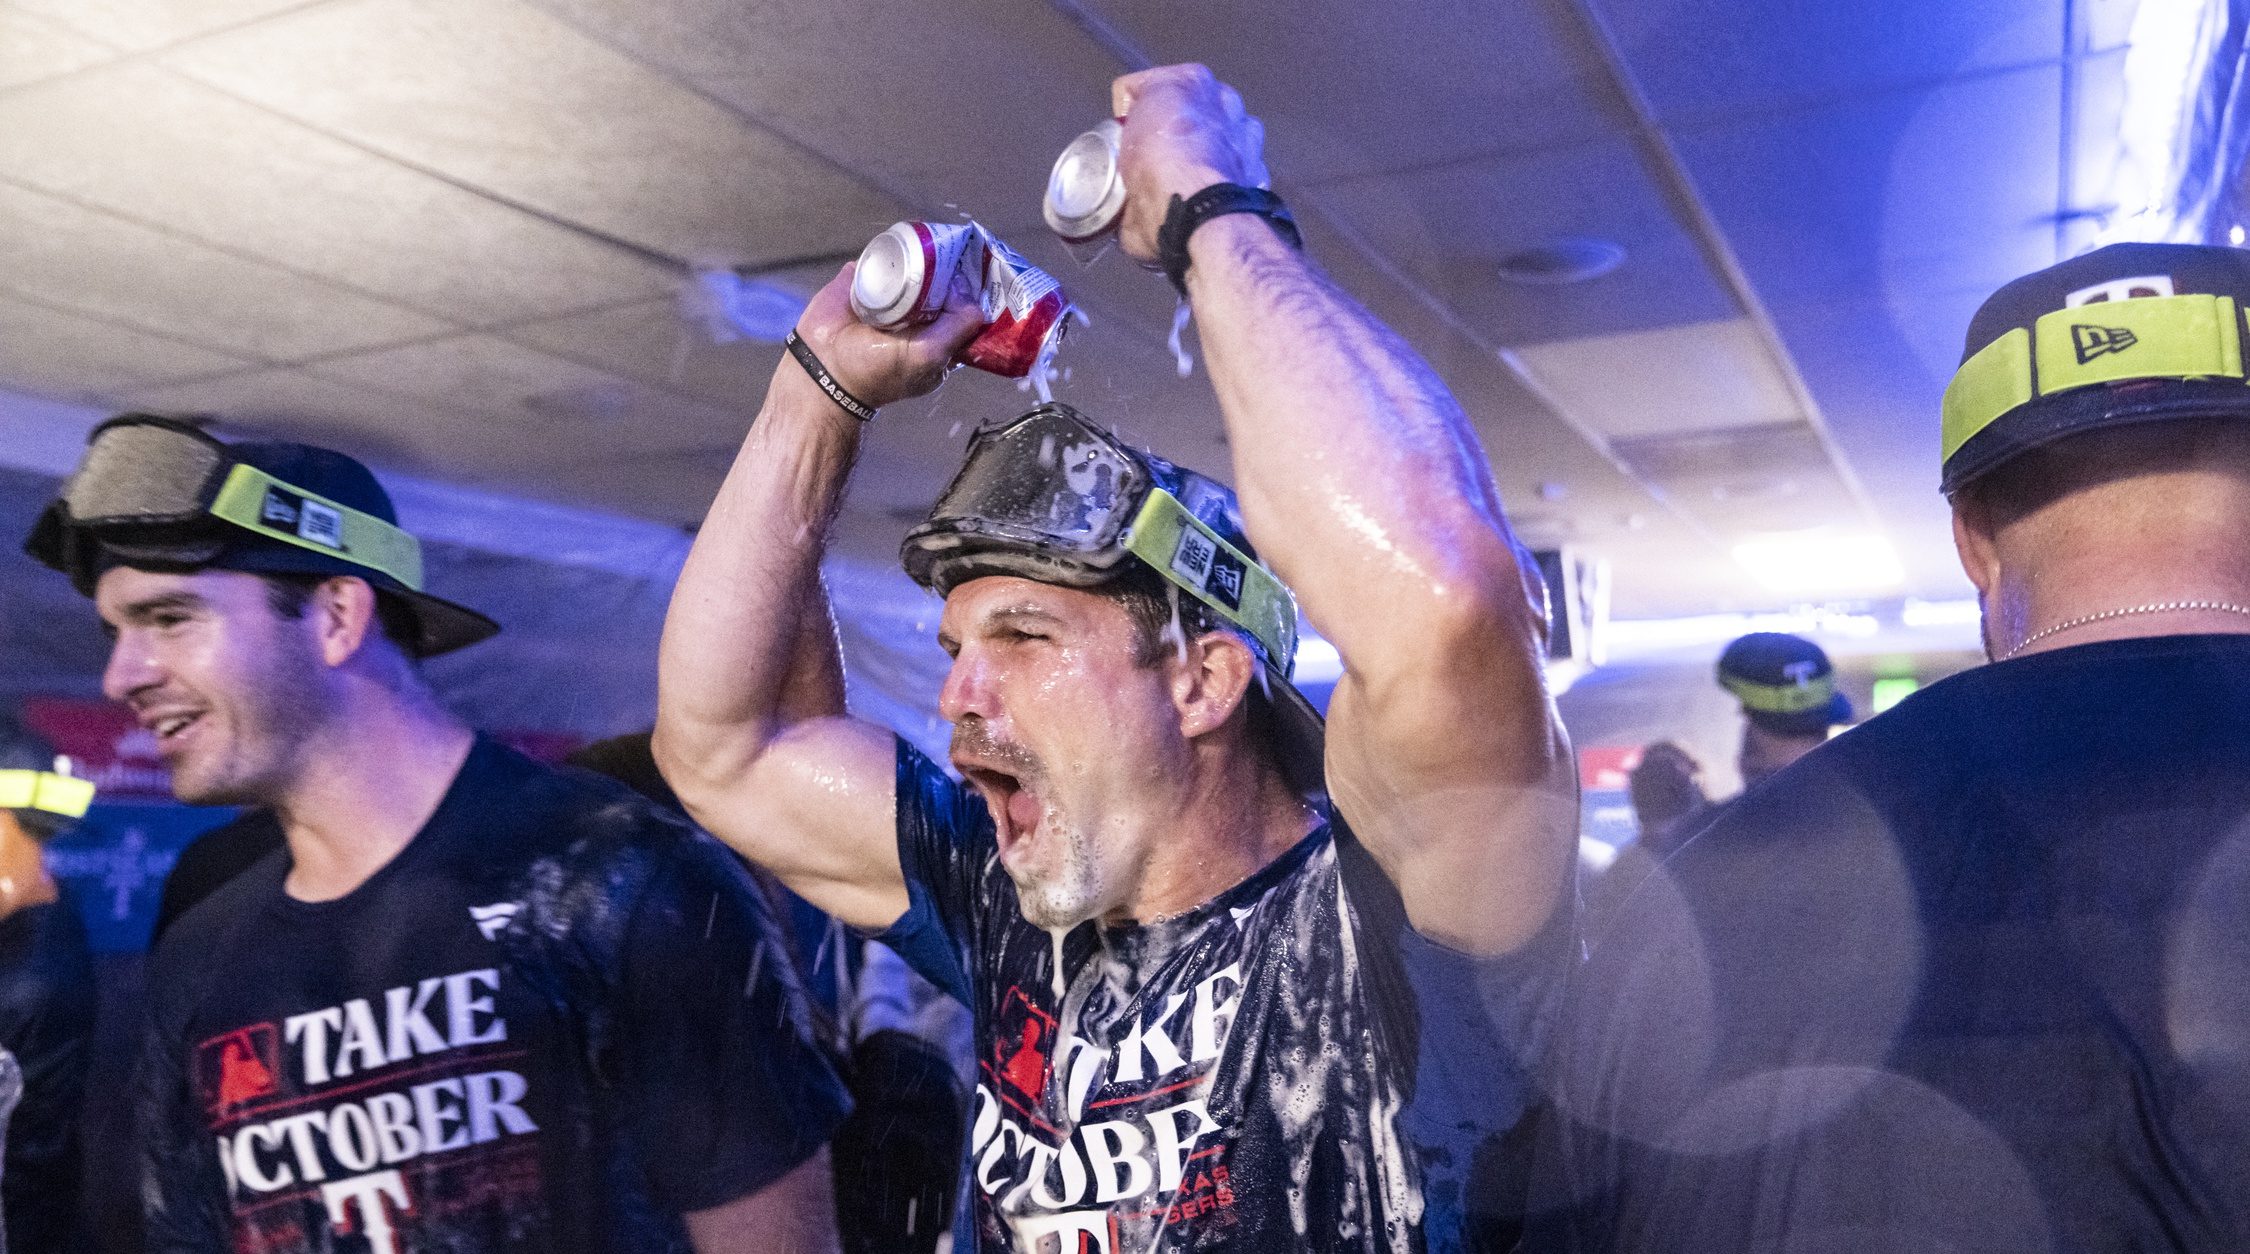 Texas Rangers celebrate in the clubhouse after clinching a post-season berth against the Seattle Mariners at T-Mobile Park